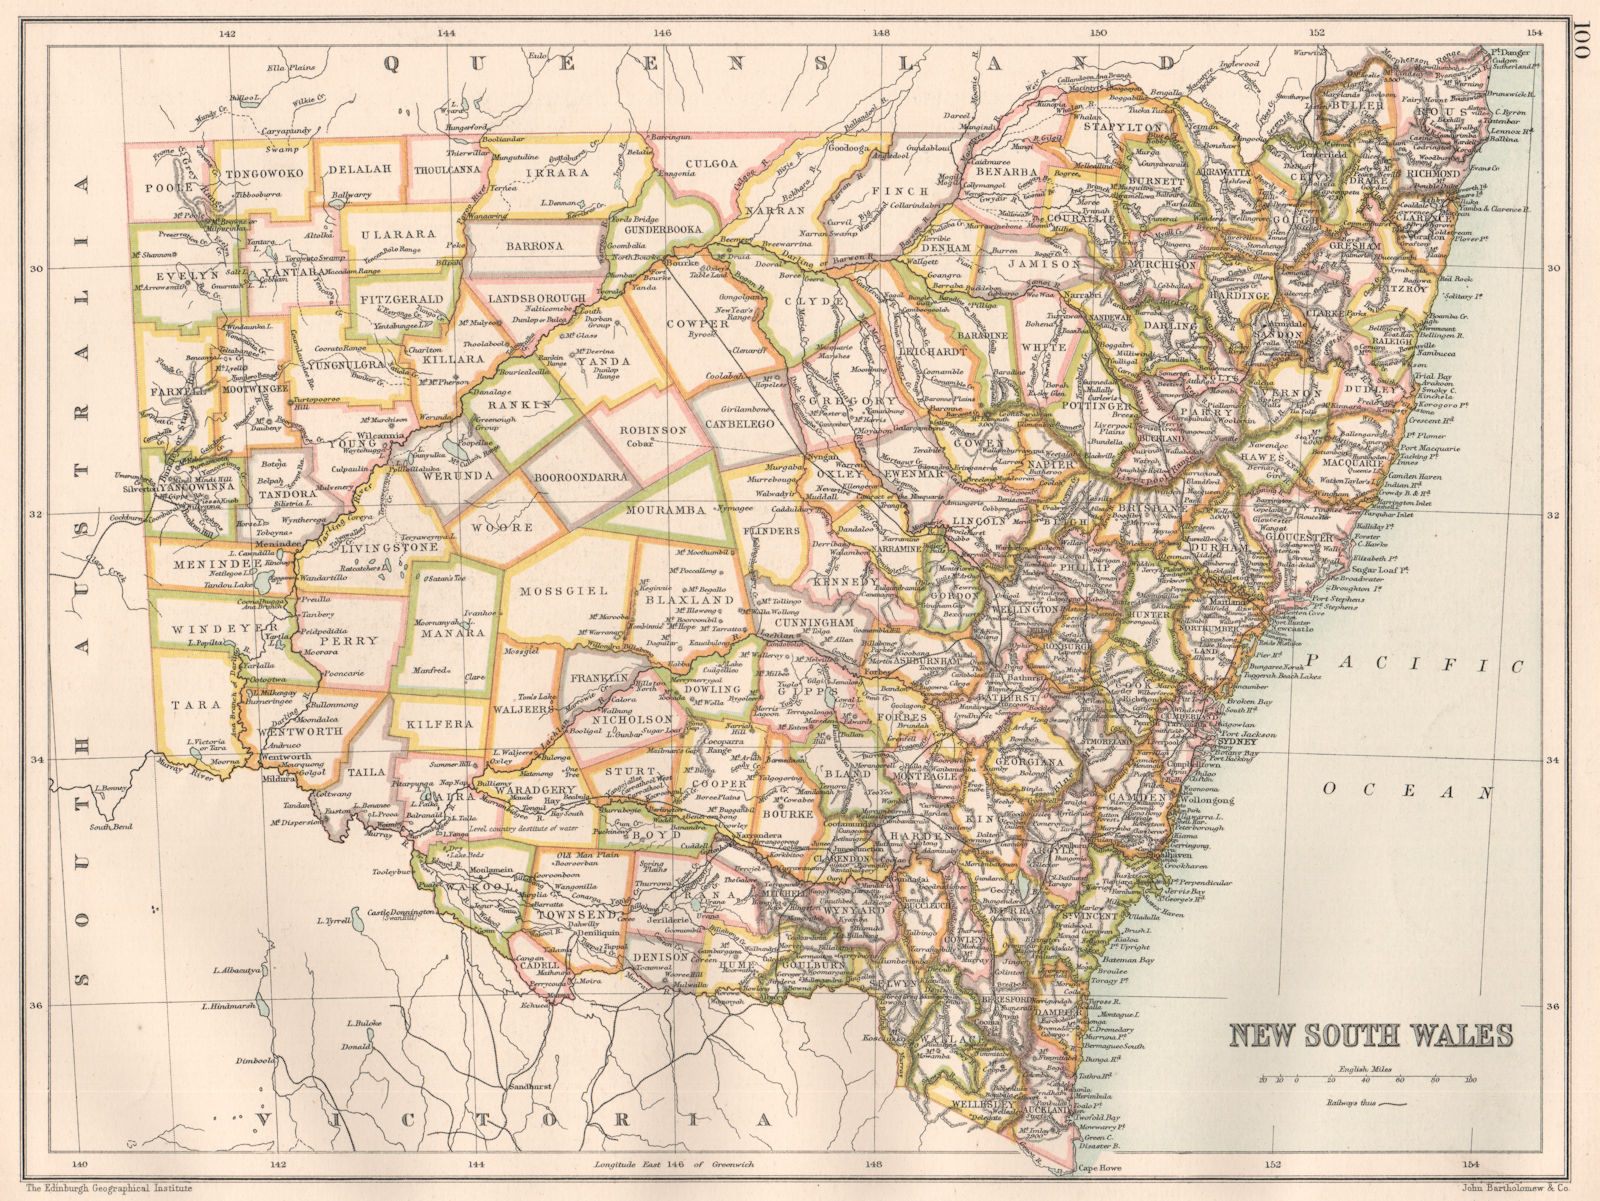 Associate Product NEW SOUTH WALES. State map showing counties. Australia. BARTHOLOMEW 1891